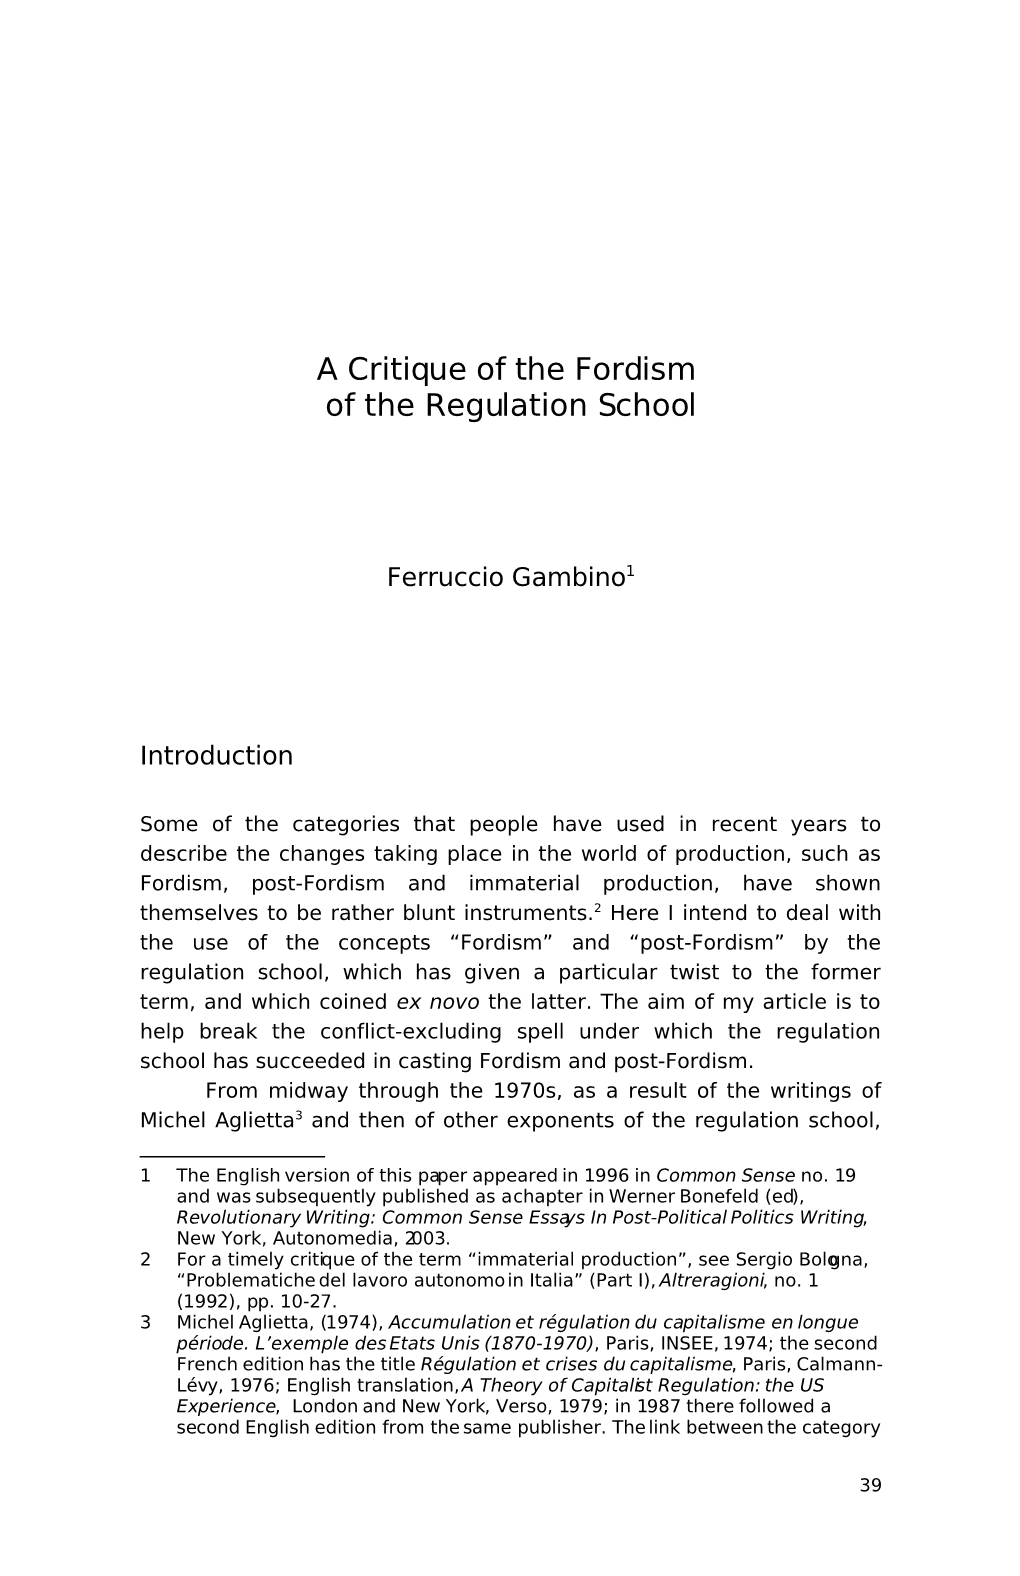 A Critique of the Fordism of the Regulation School